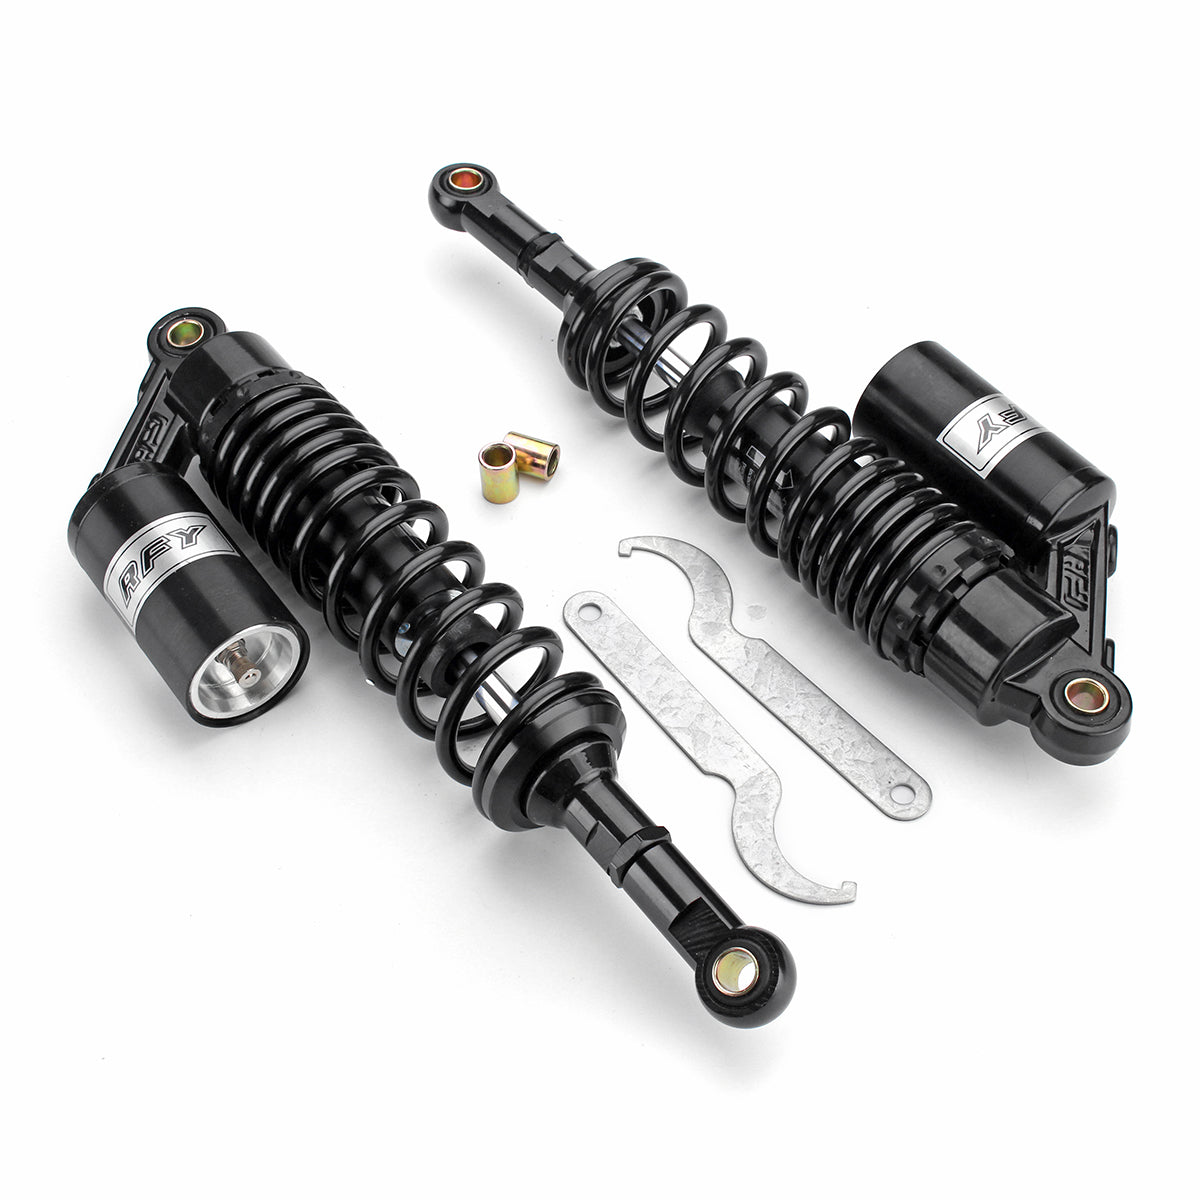 White Smoke 400mm 15.74inch Rear Air Shock Absorbers Suspension For ATV Motorcycle Dirt Bike